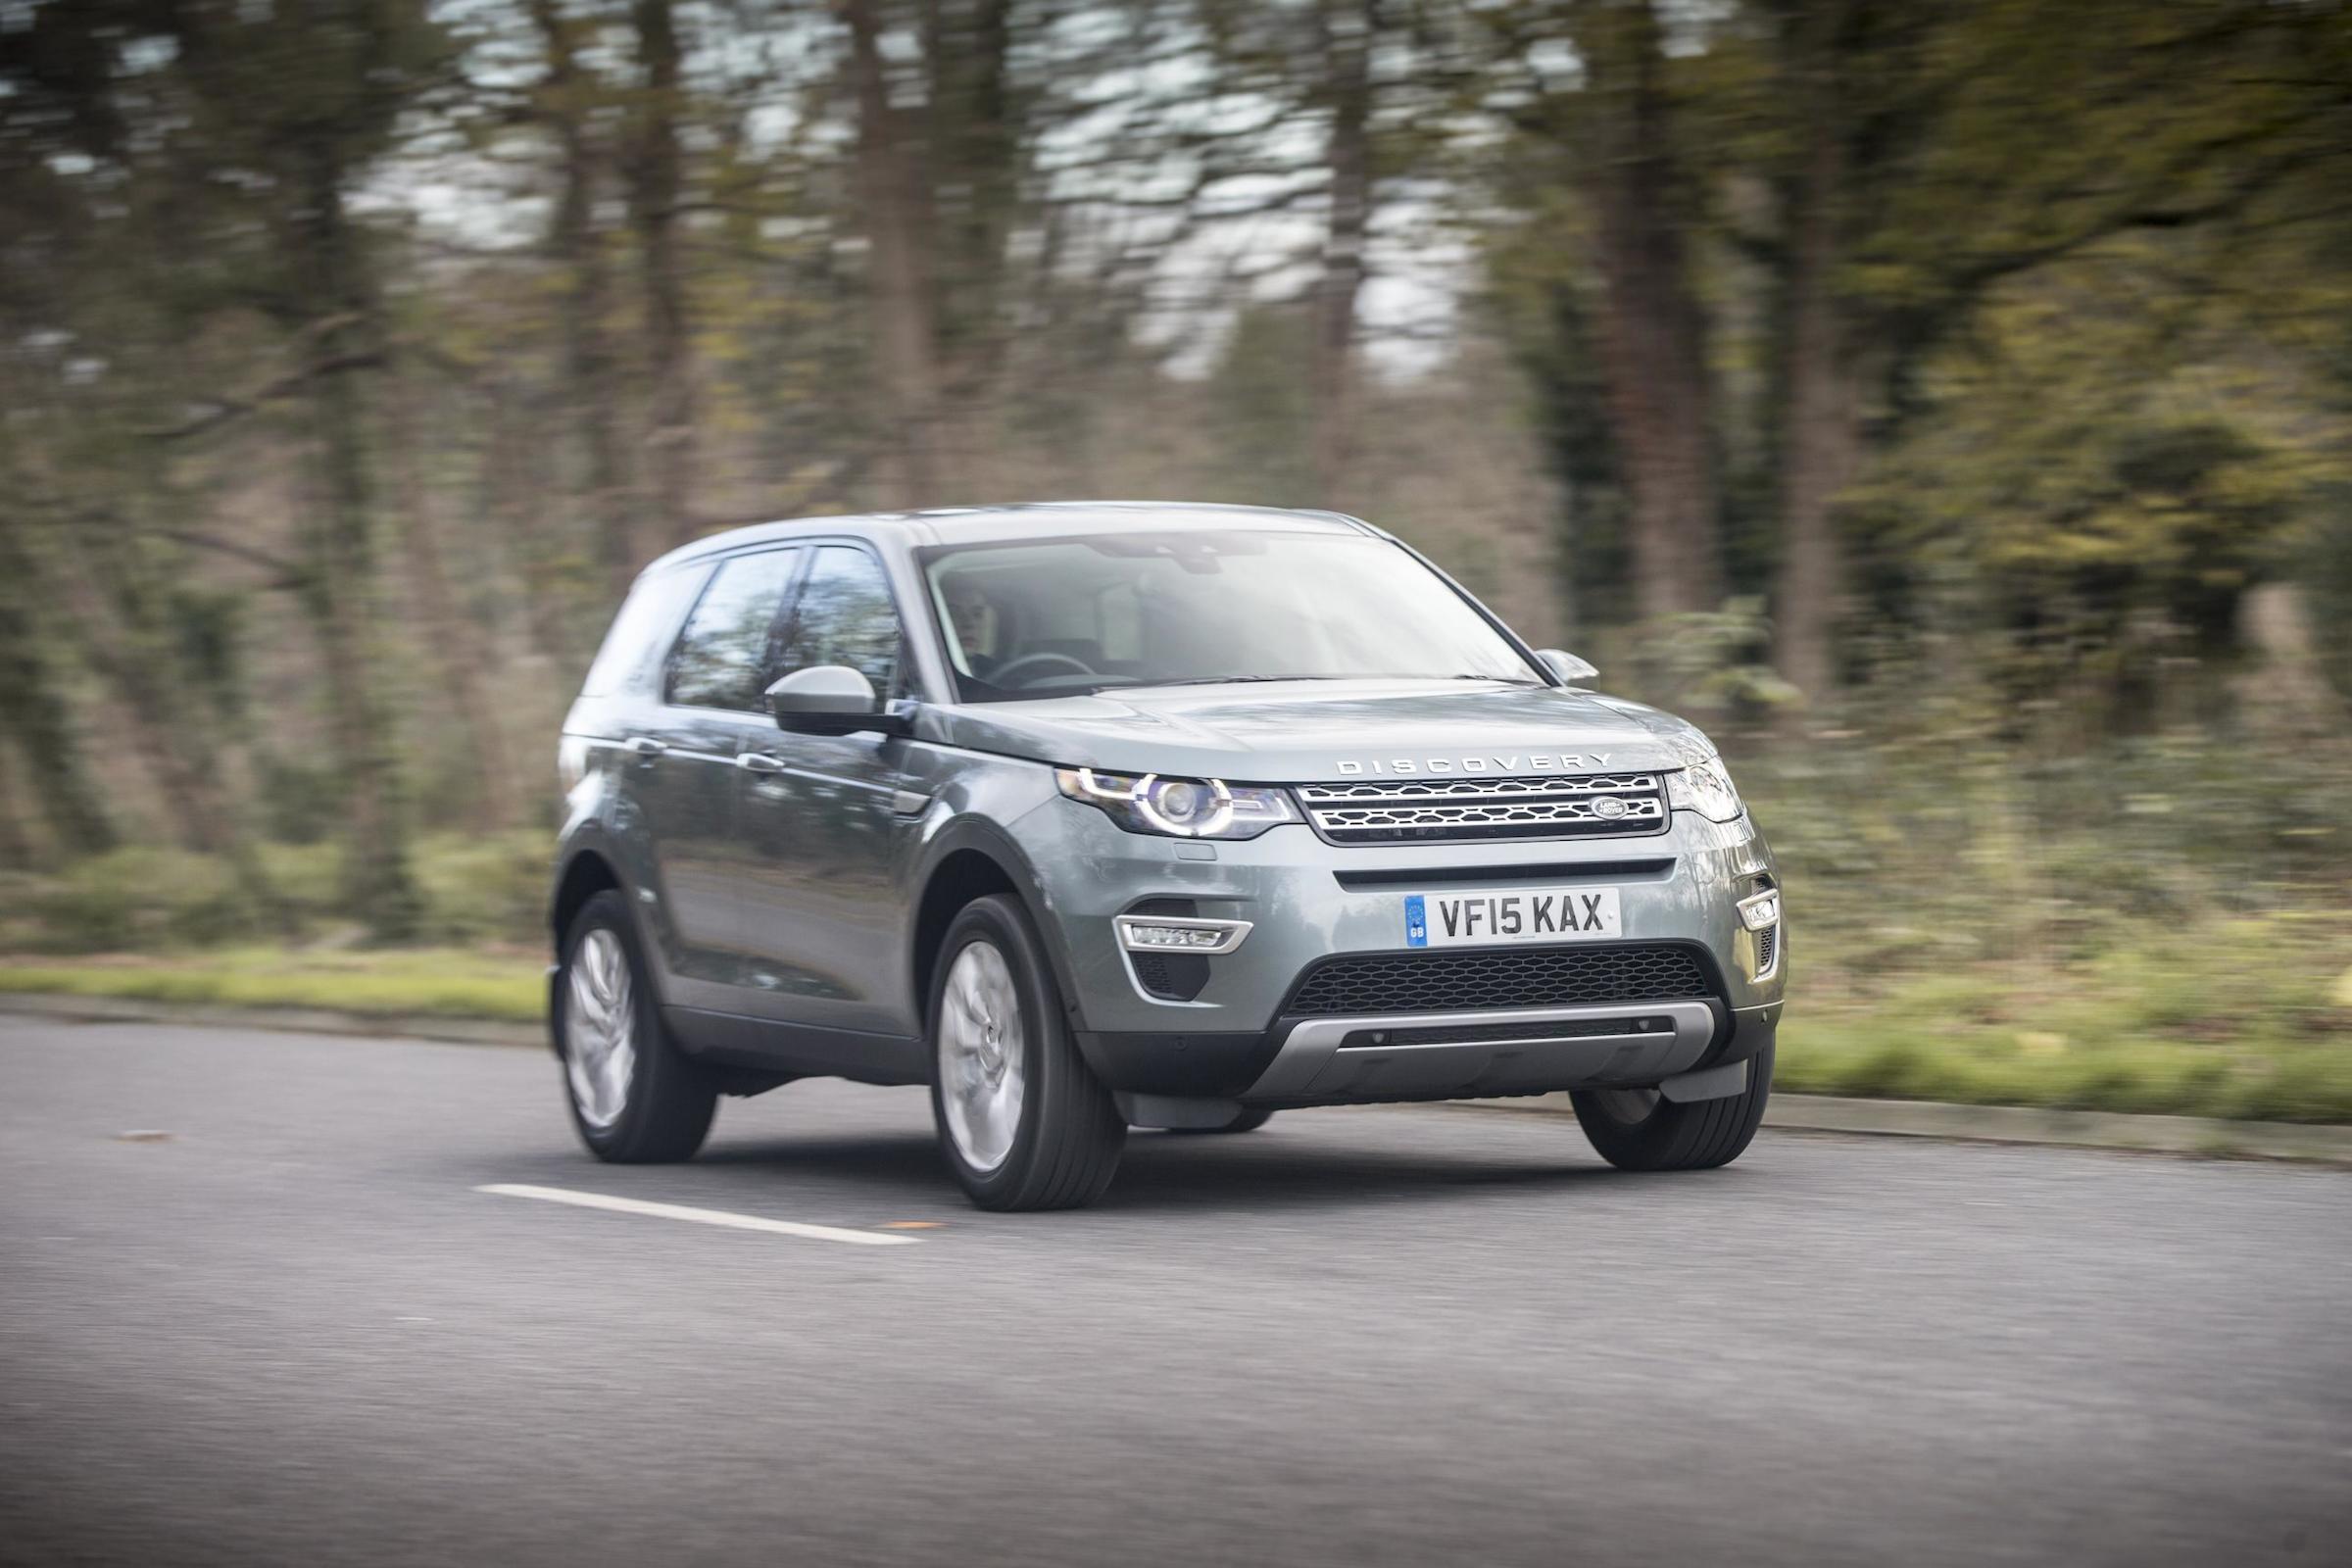 Used Land Rover Discovery Sport guide: 2014-present (Mk1)